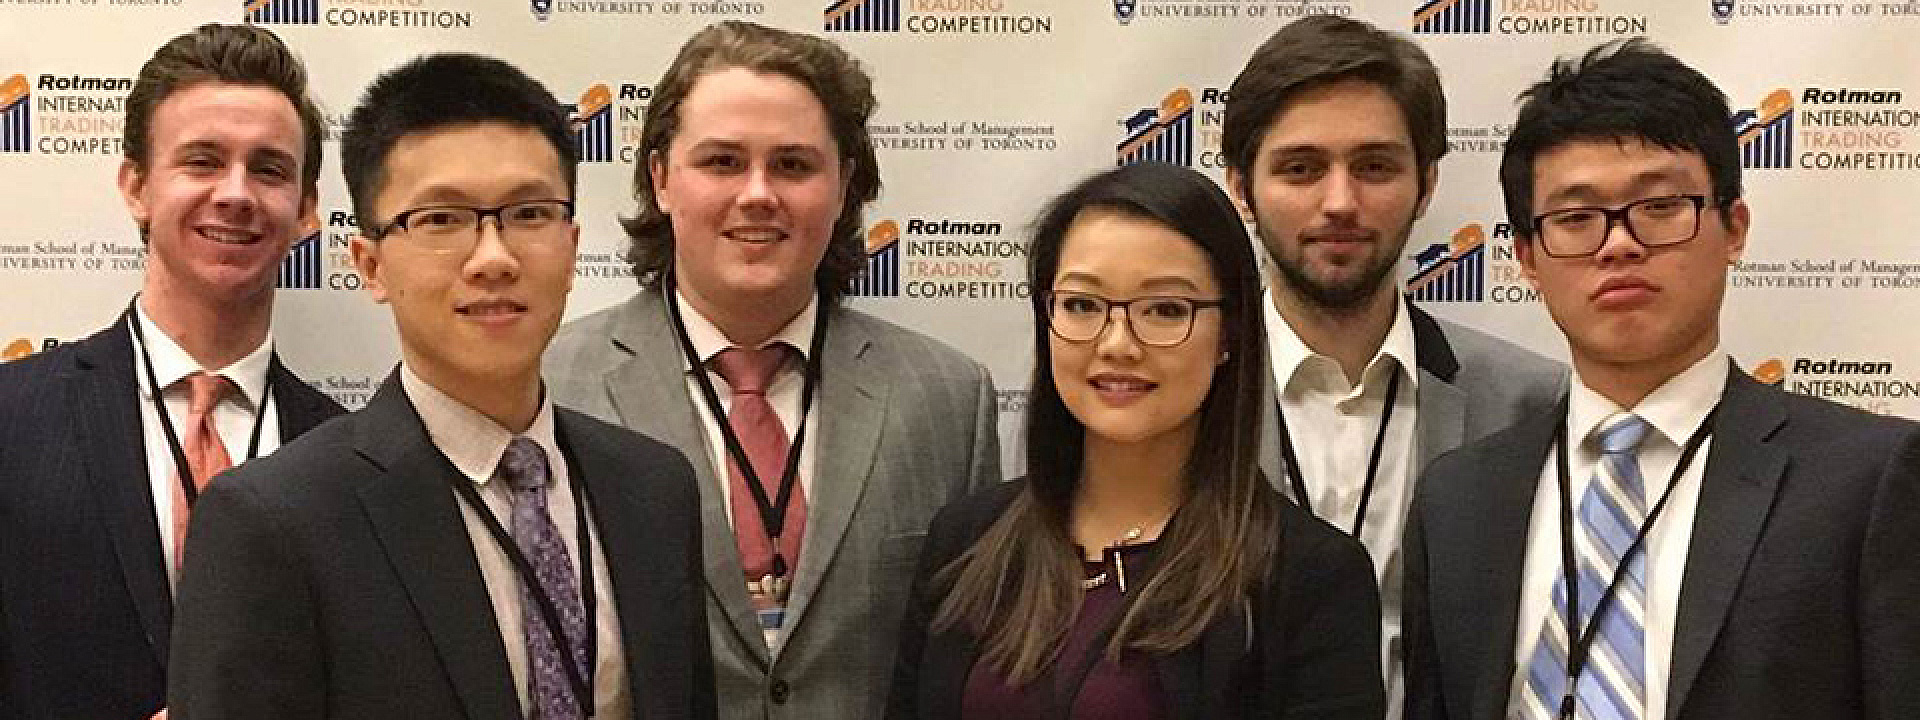 Telfer continues to impress at annual Rotman International Trading Competition